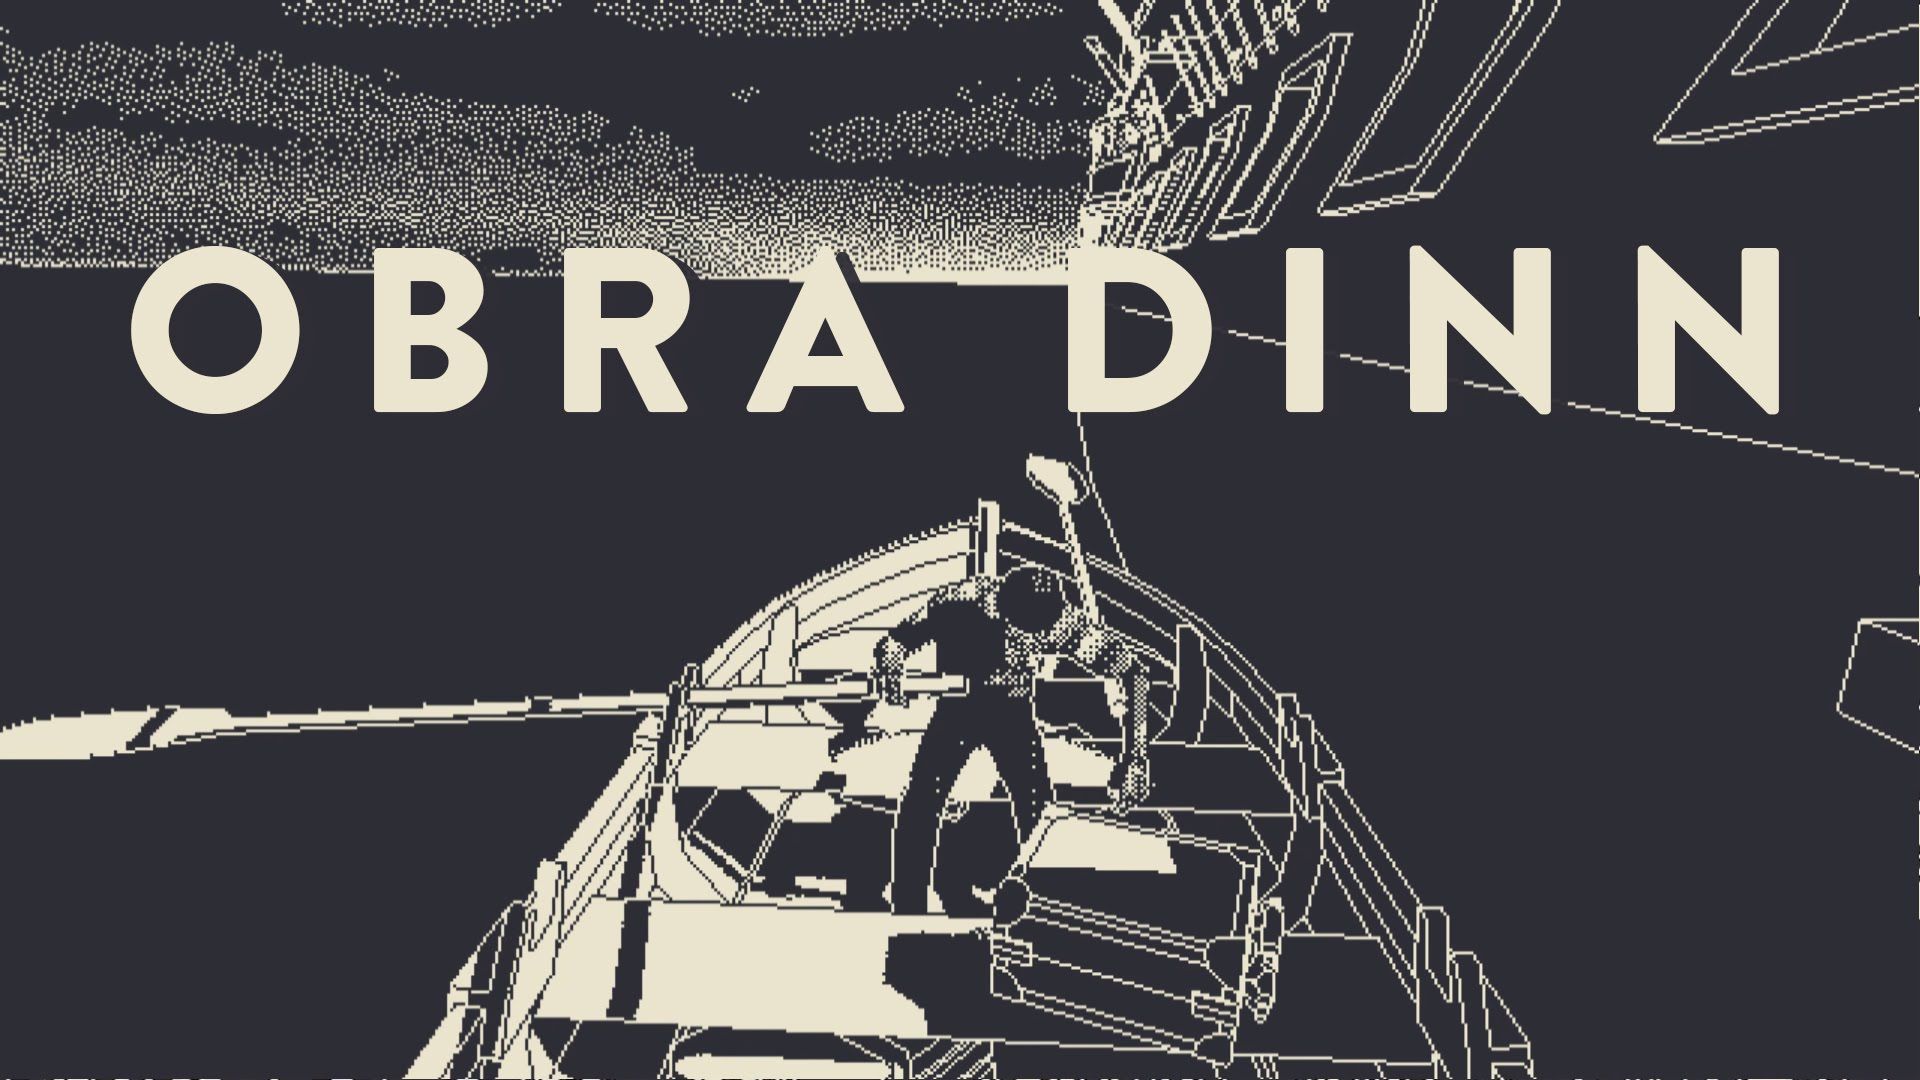 Return of the Obra Dinn available today Let's talk about video games